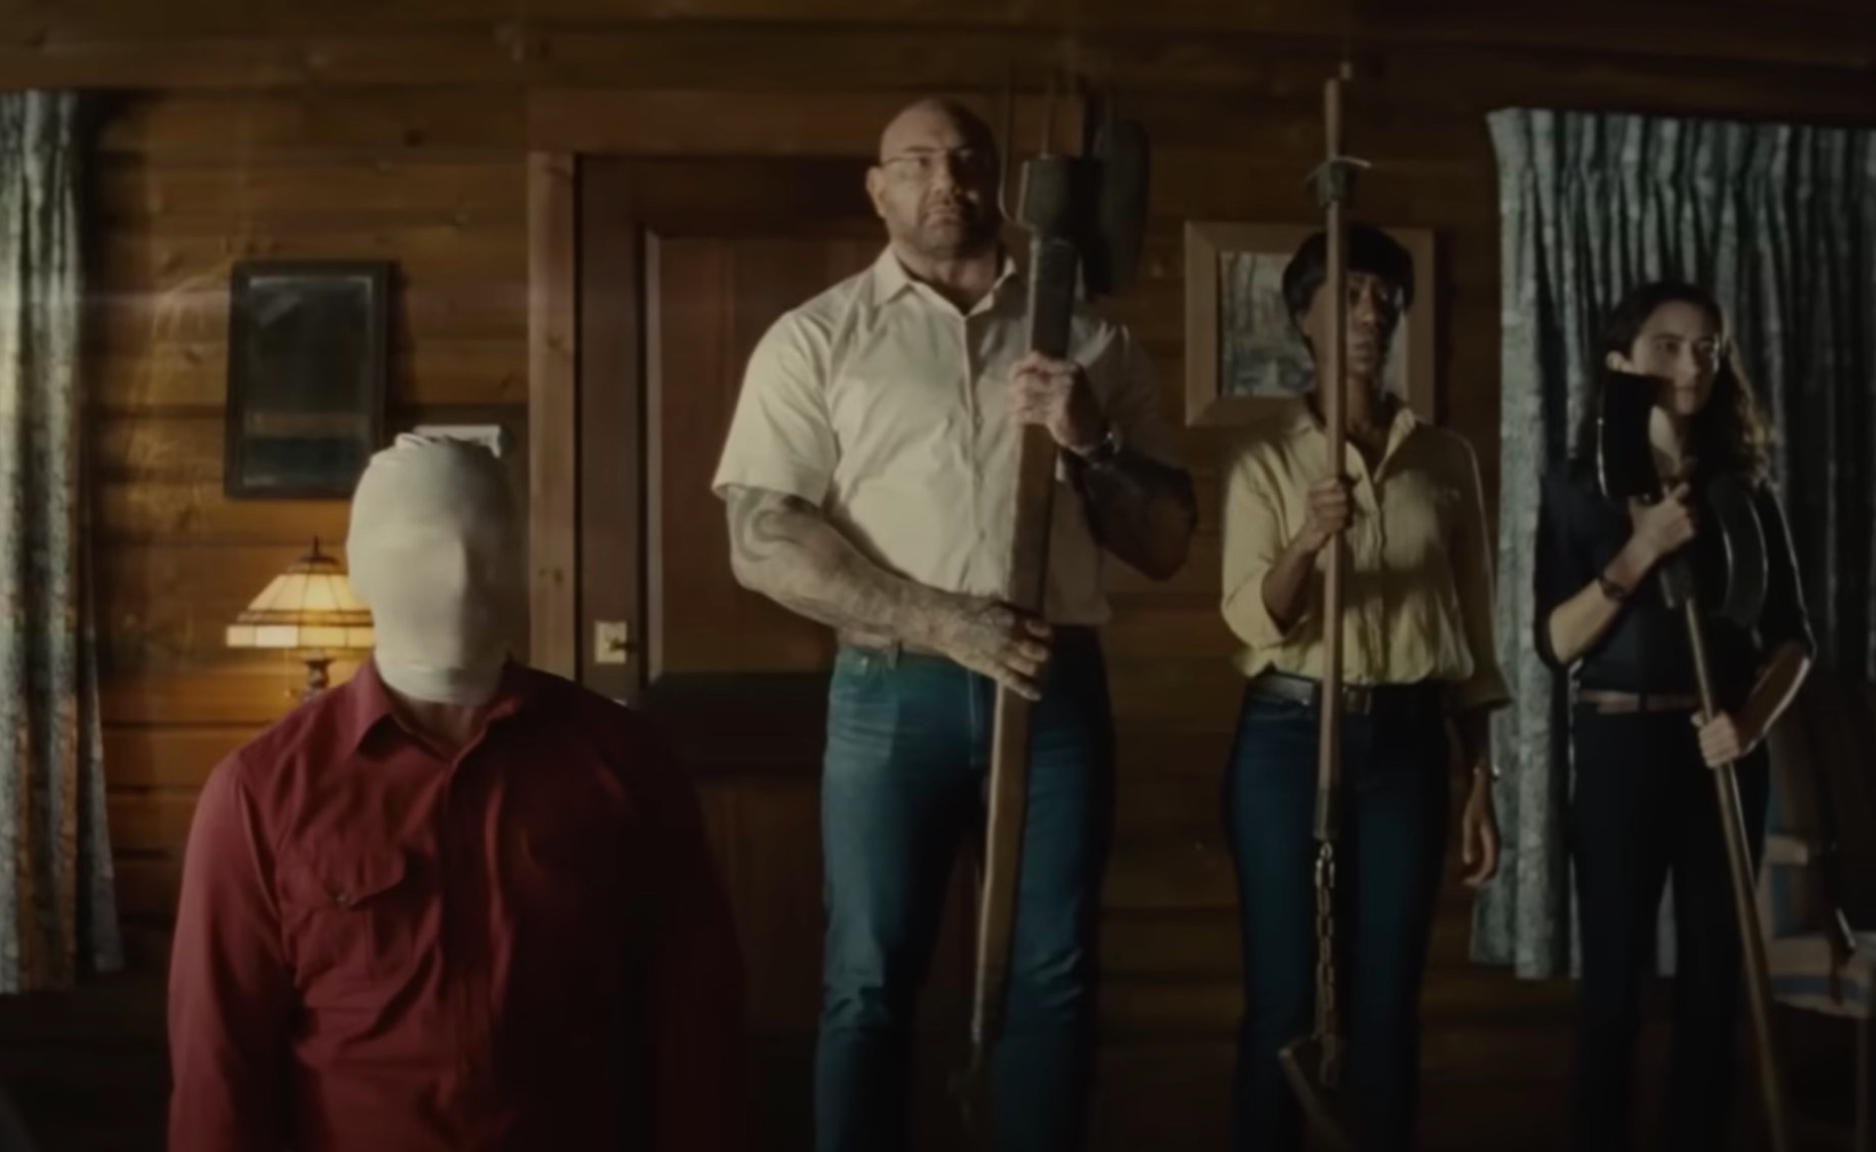 Knock at the Cabin on Netflix ending explained